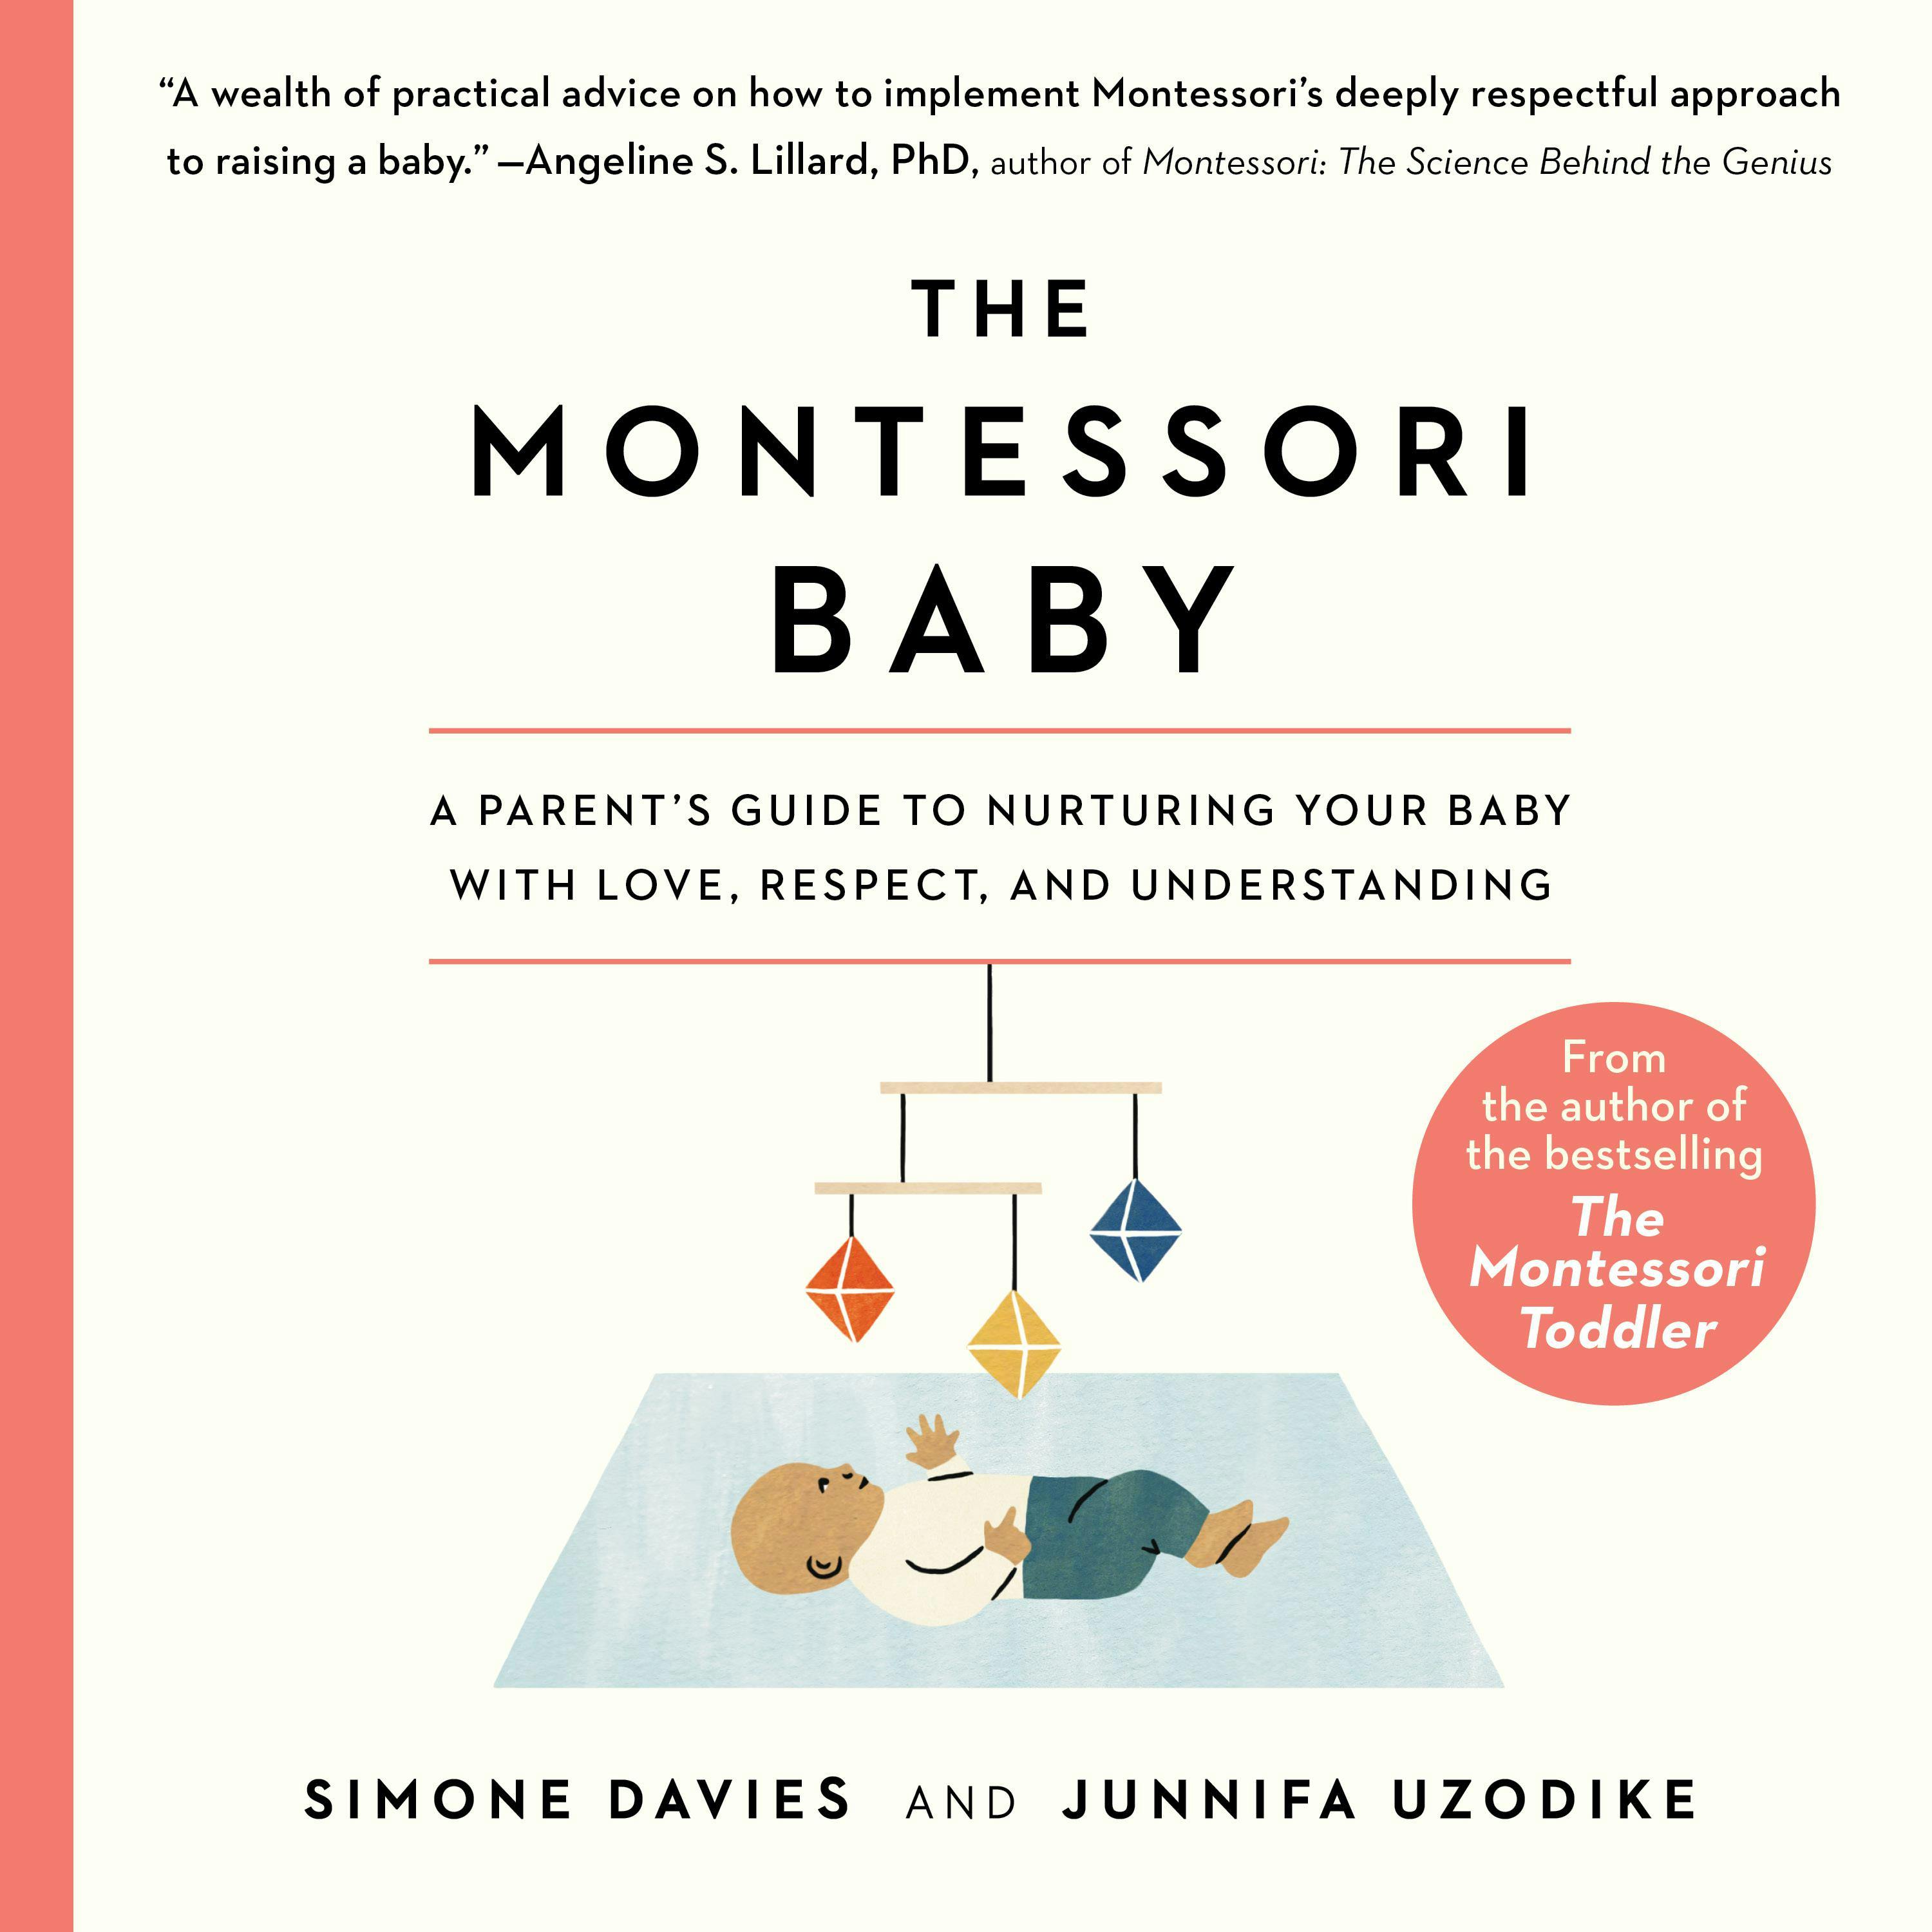 The Montessori Baby: A Parent's Guide to Nurturing Your Baby with Love, Respect, and Understanding - Simone Davies, Junnifa Uzodike, Sanny van Loon